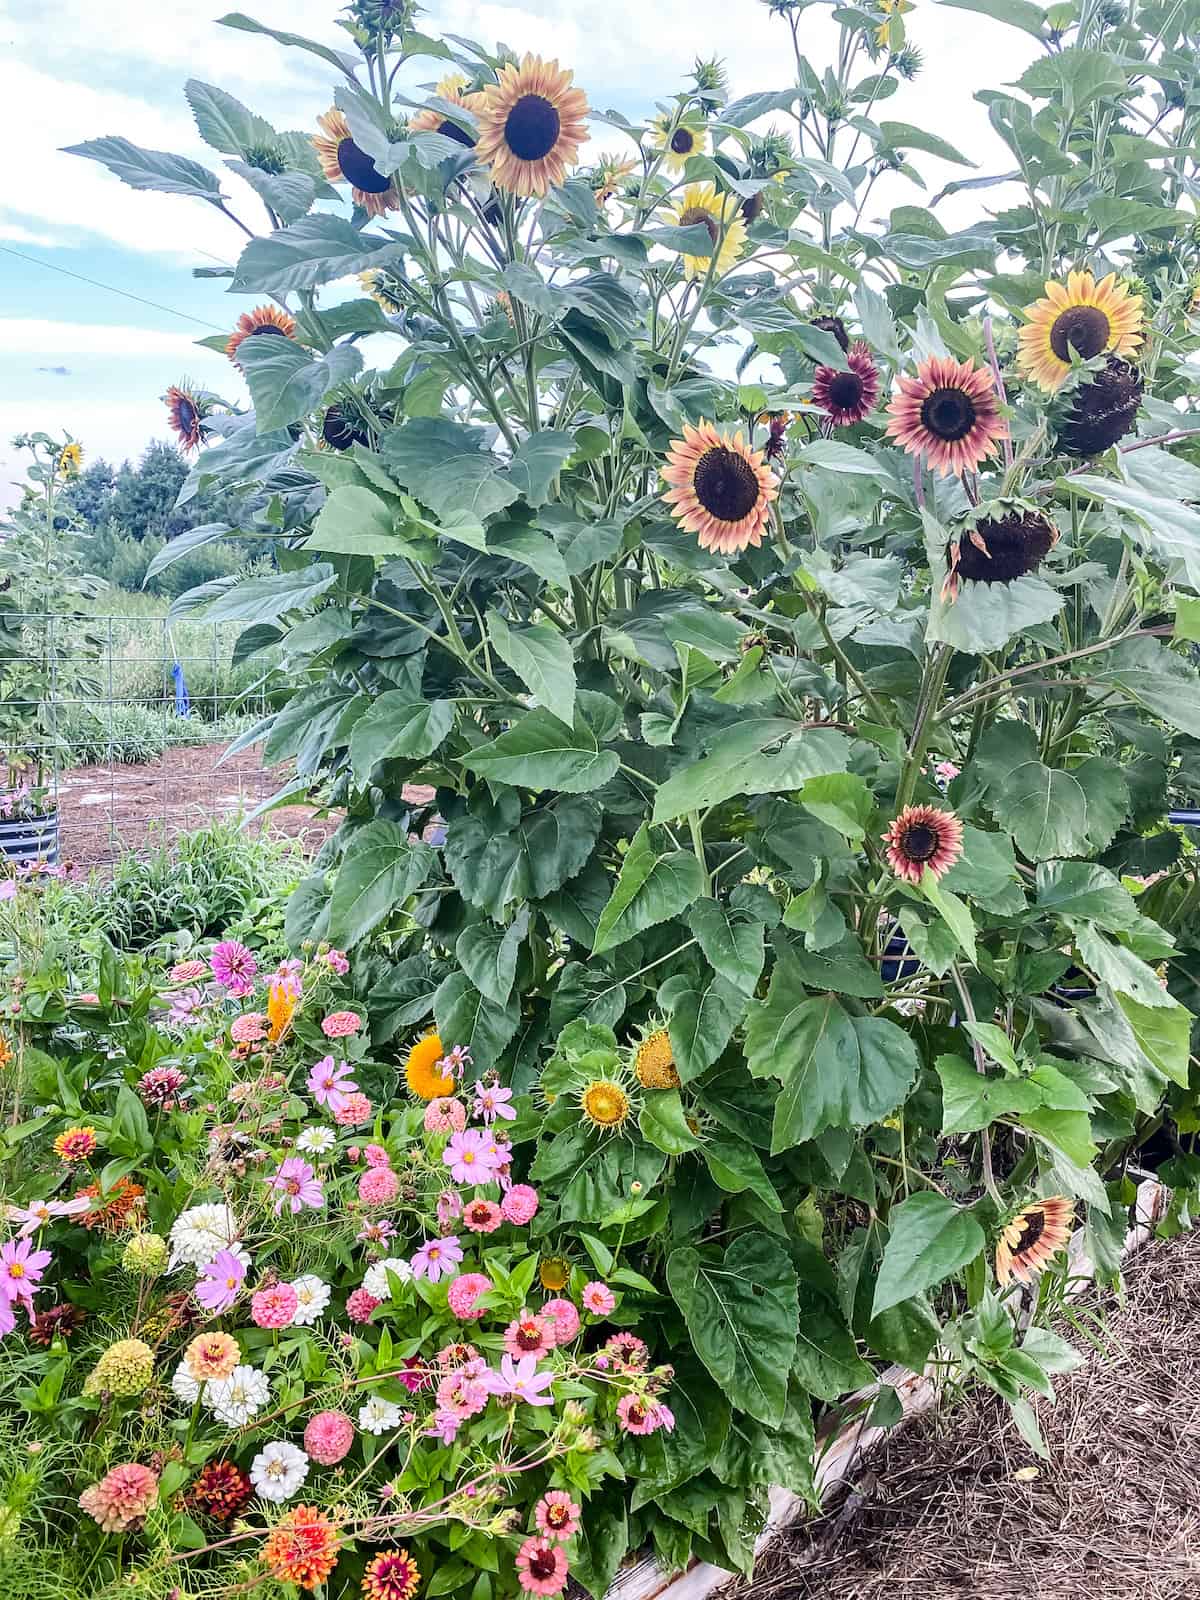 cut flower garden with sunflowers, zinnia, and cosmos in a wooden raised bed.